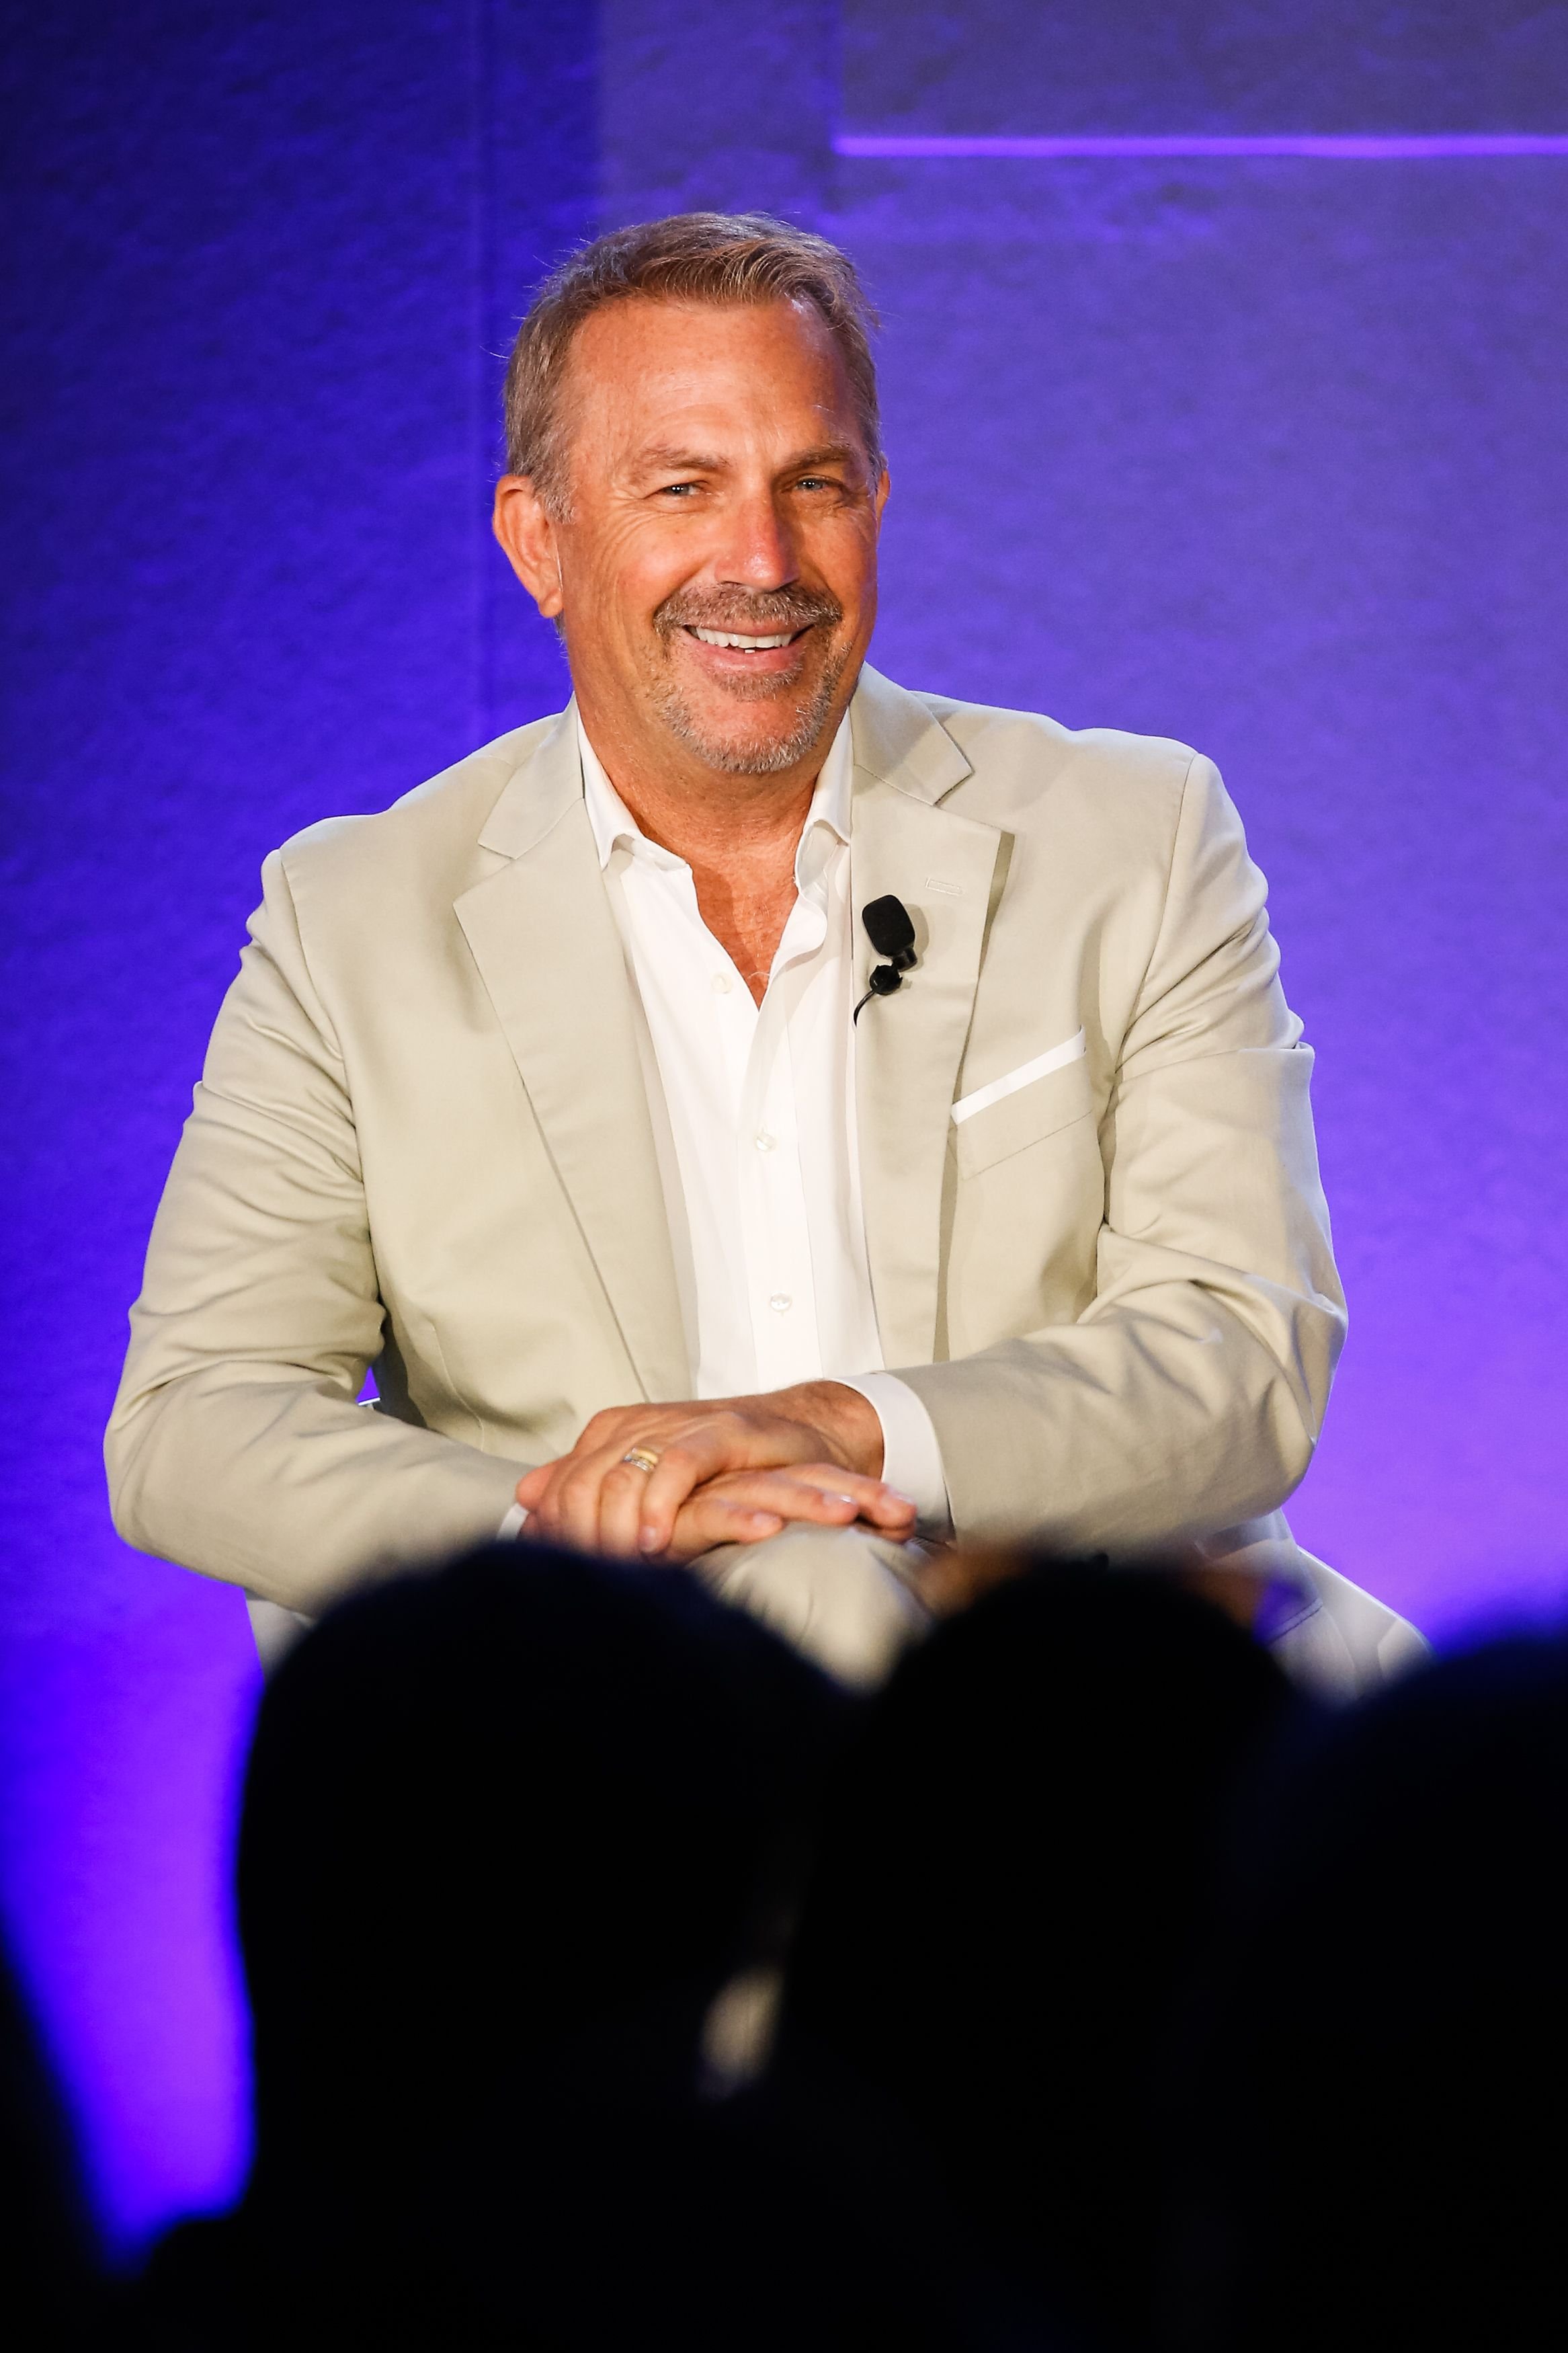 Kevin Costner during 'A conversation with Kevin Costner from Paramount Network and Yellowstone' during the Cannes Lions Festival 2018 on June 21, 2018, in Cannes, France. | Source: Getty Images